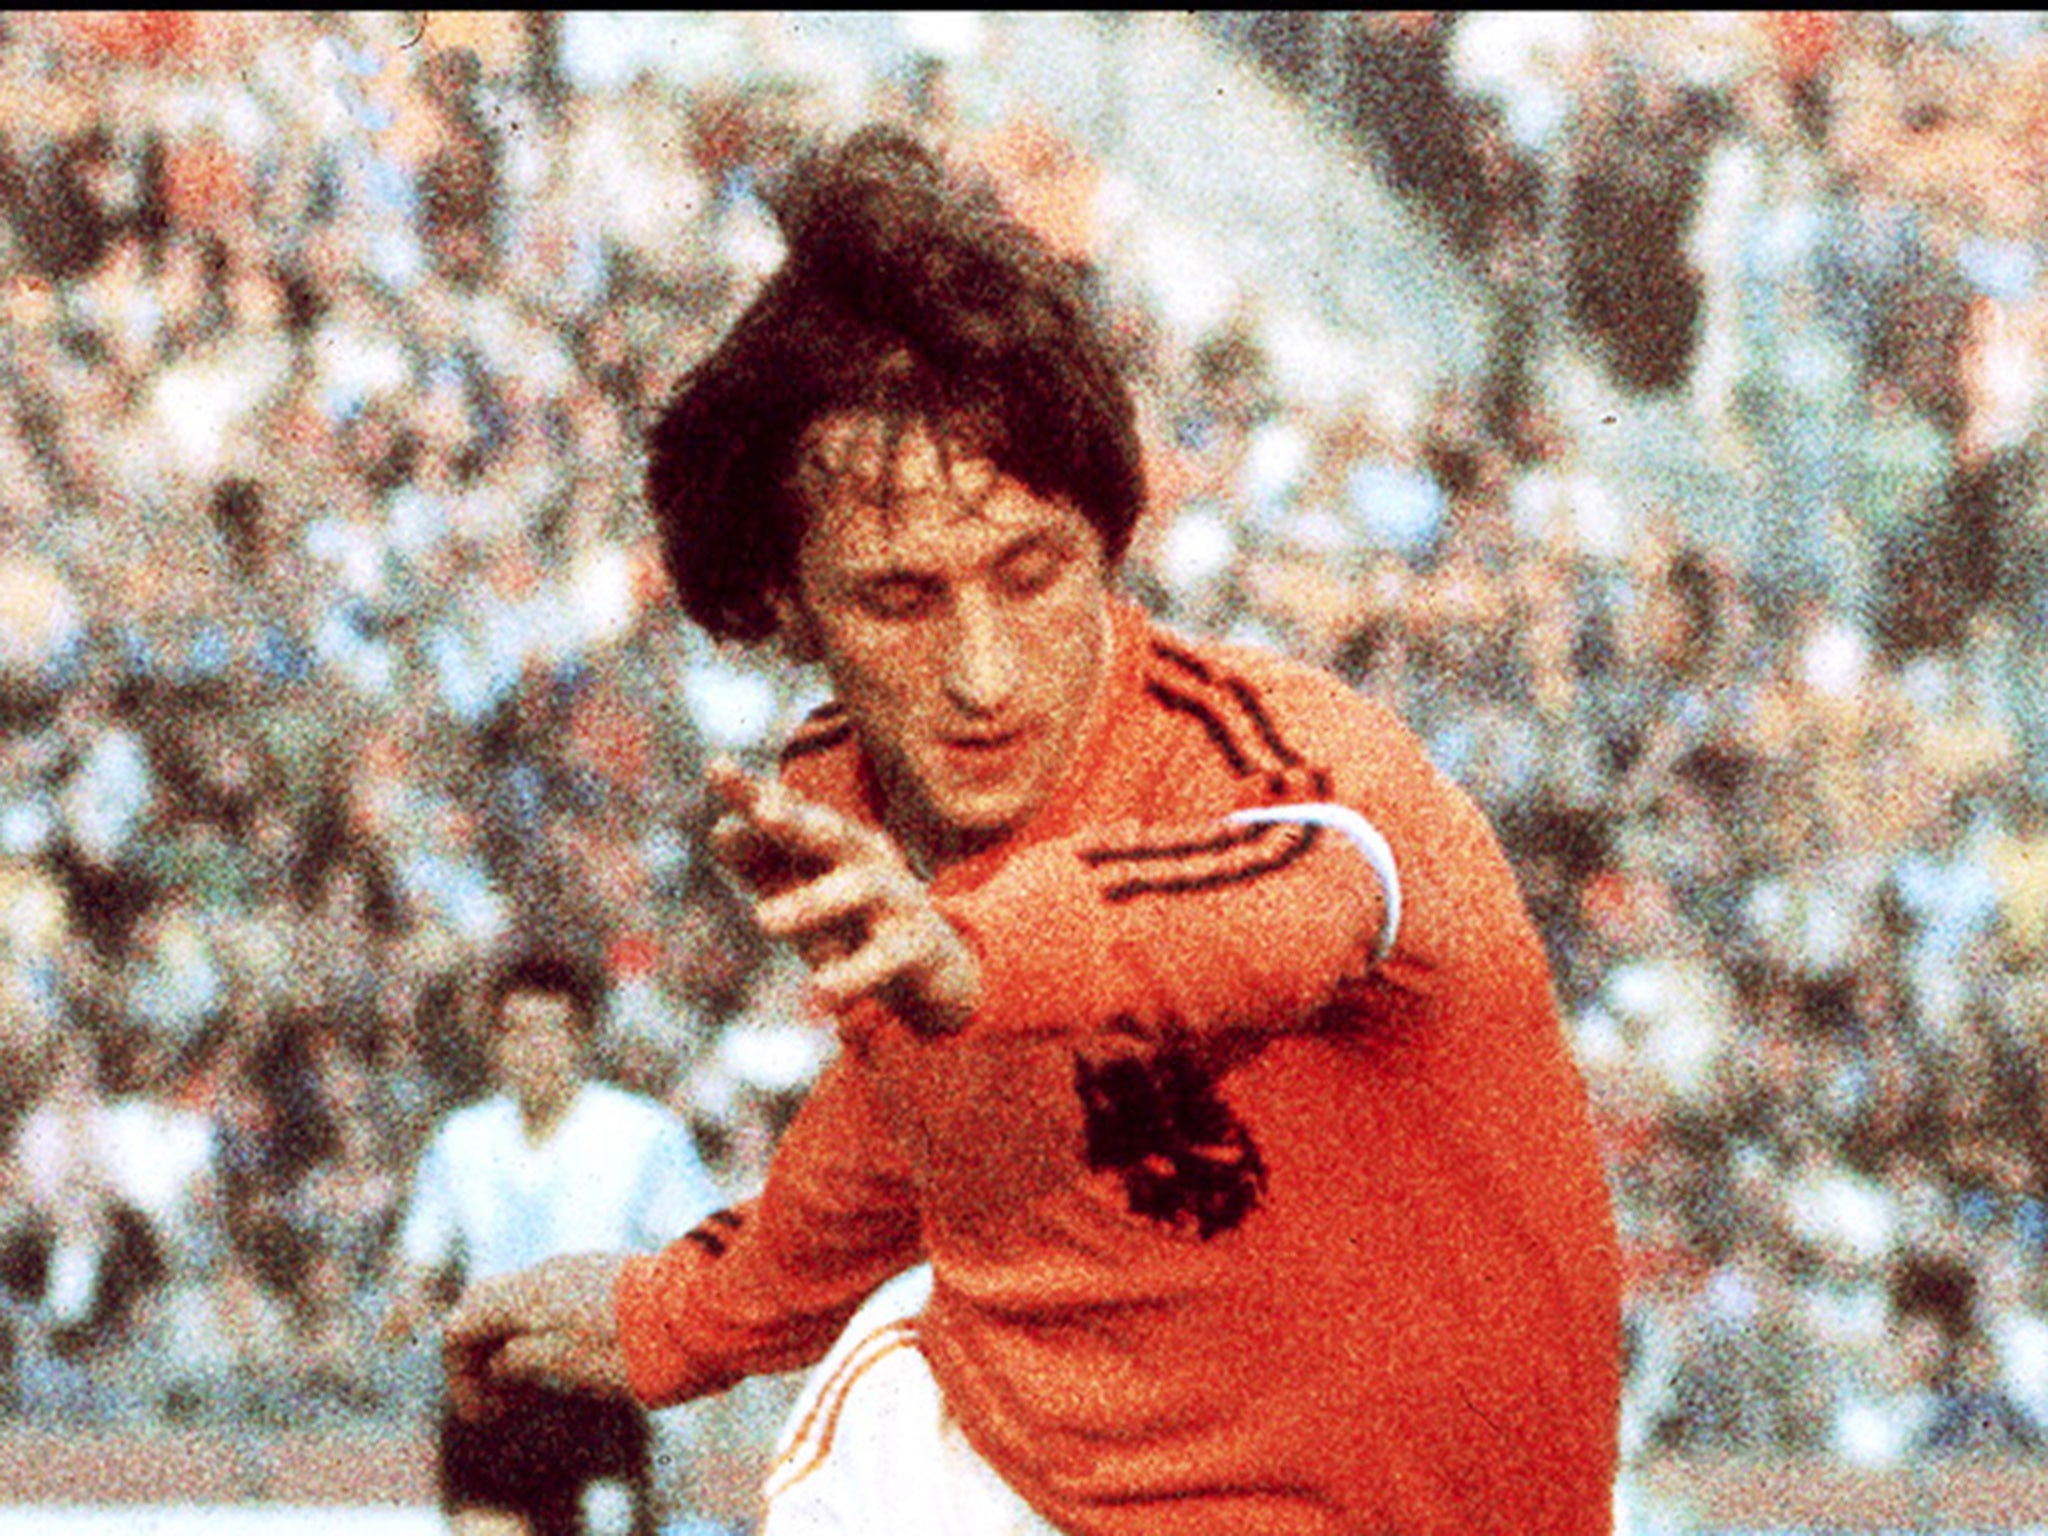 Johan Cruyff dead: why Cruyff refused to wear trademark three stripes of at 1974 World Cup | The | The Independent